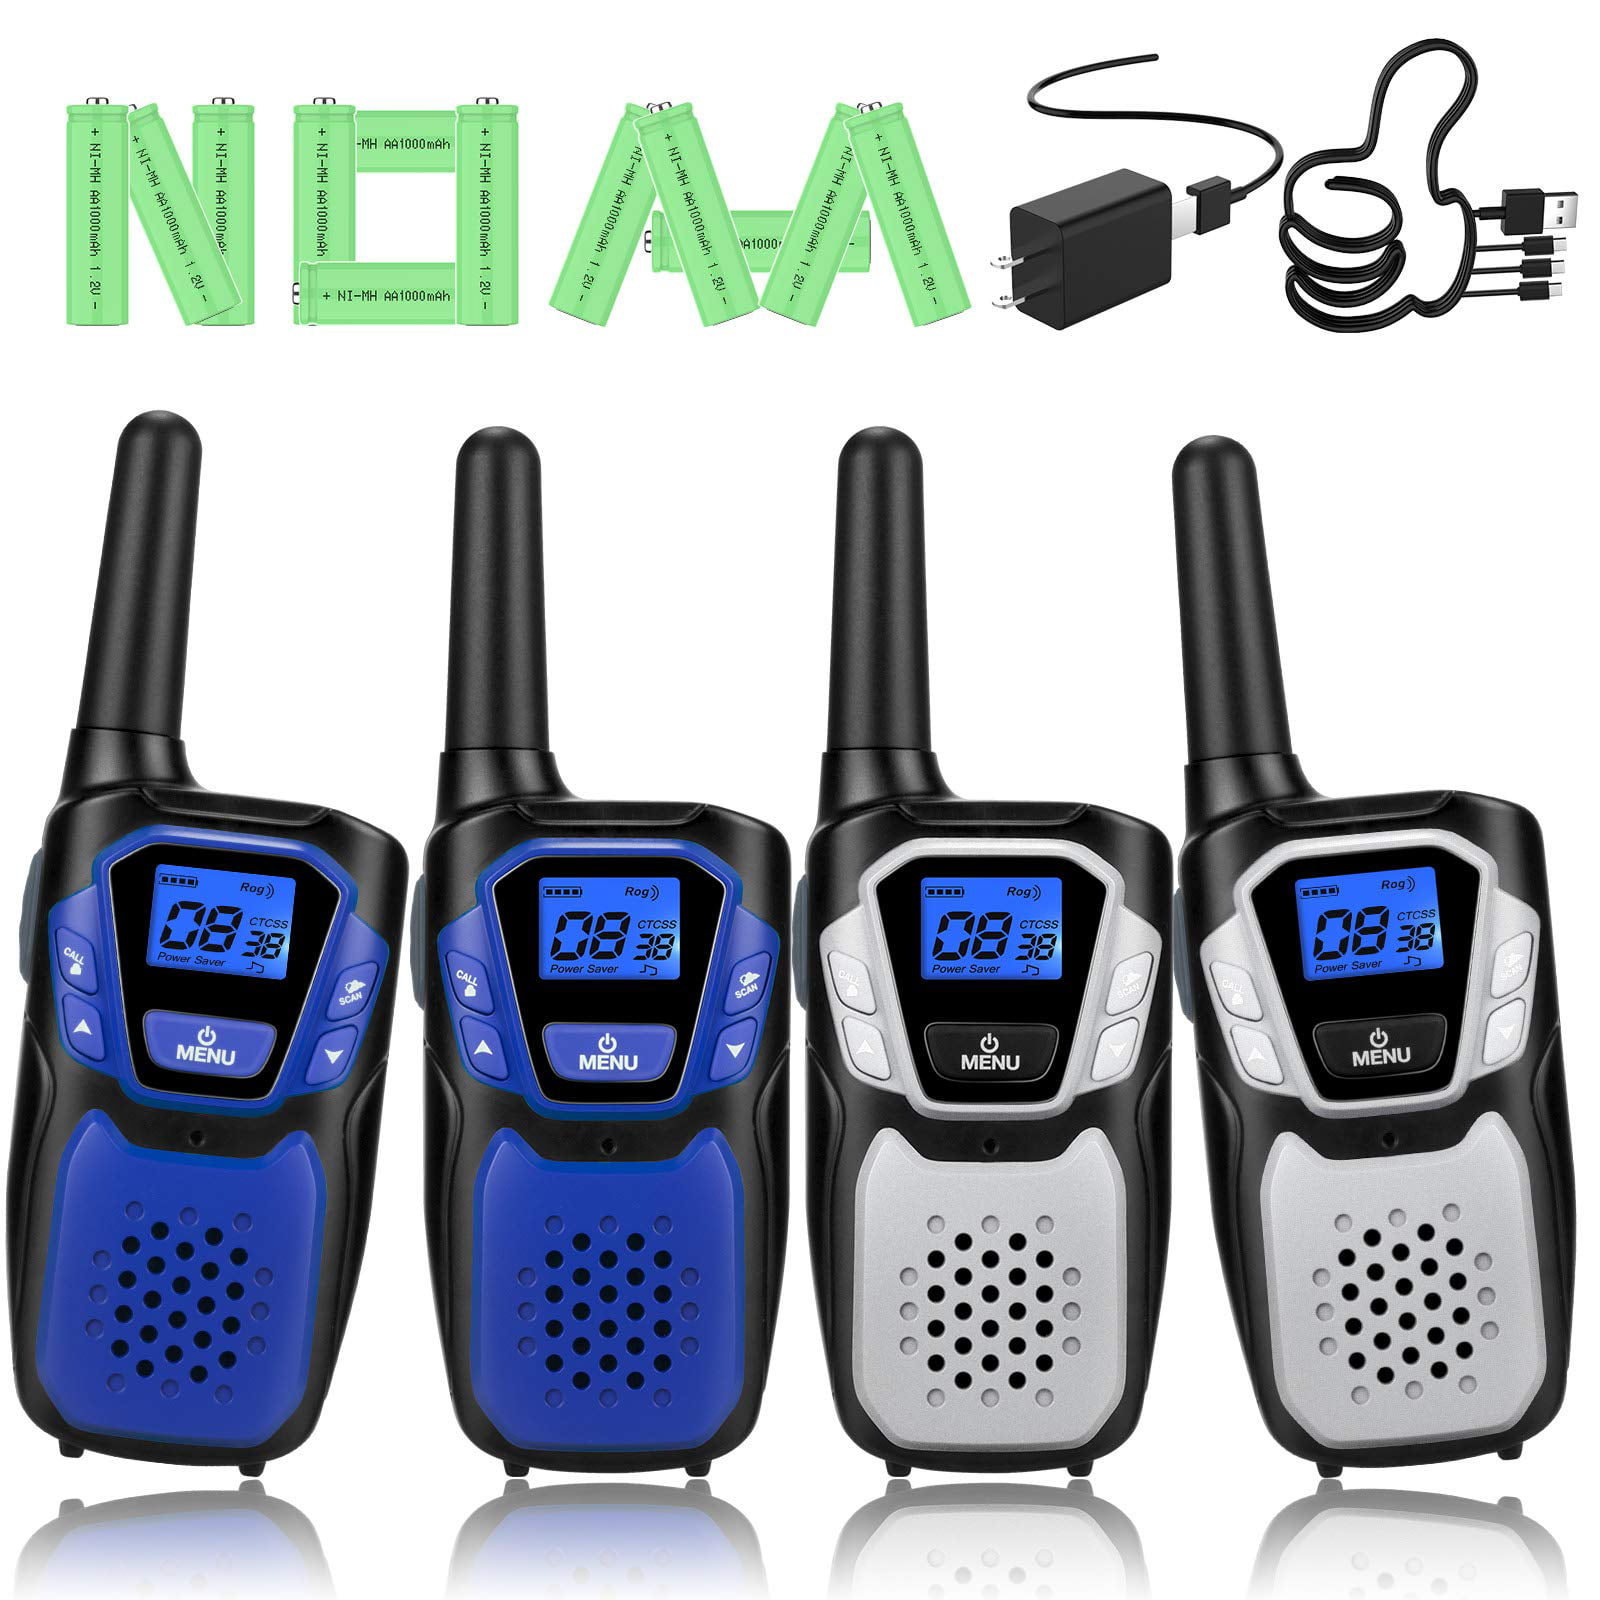 Walkie Talkies Rechargeable, Pack Easy to Use Long Range Walky Talky for  Adult Handheld Two Way Radio with NOAA for Hiking Camping (2Blue  2Silver  with Regular Micro-USB Charger/Battery/Lanyard)